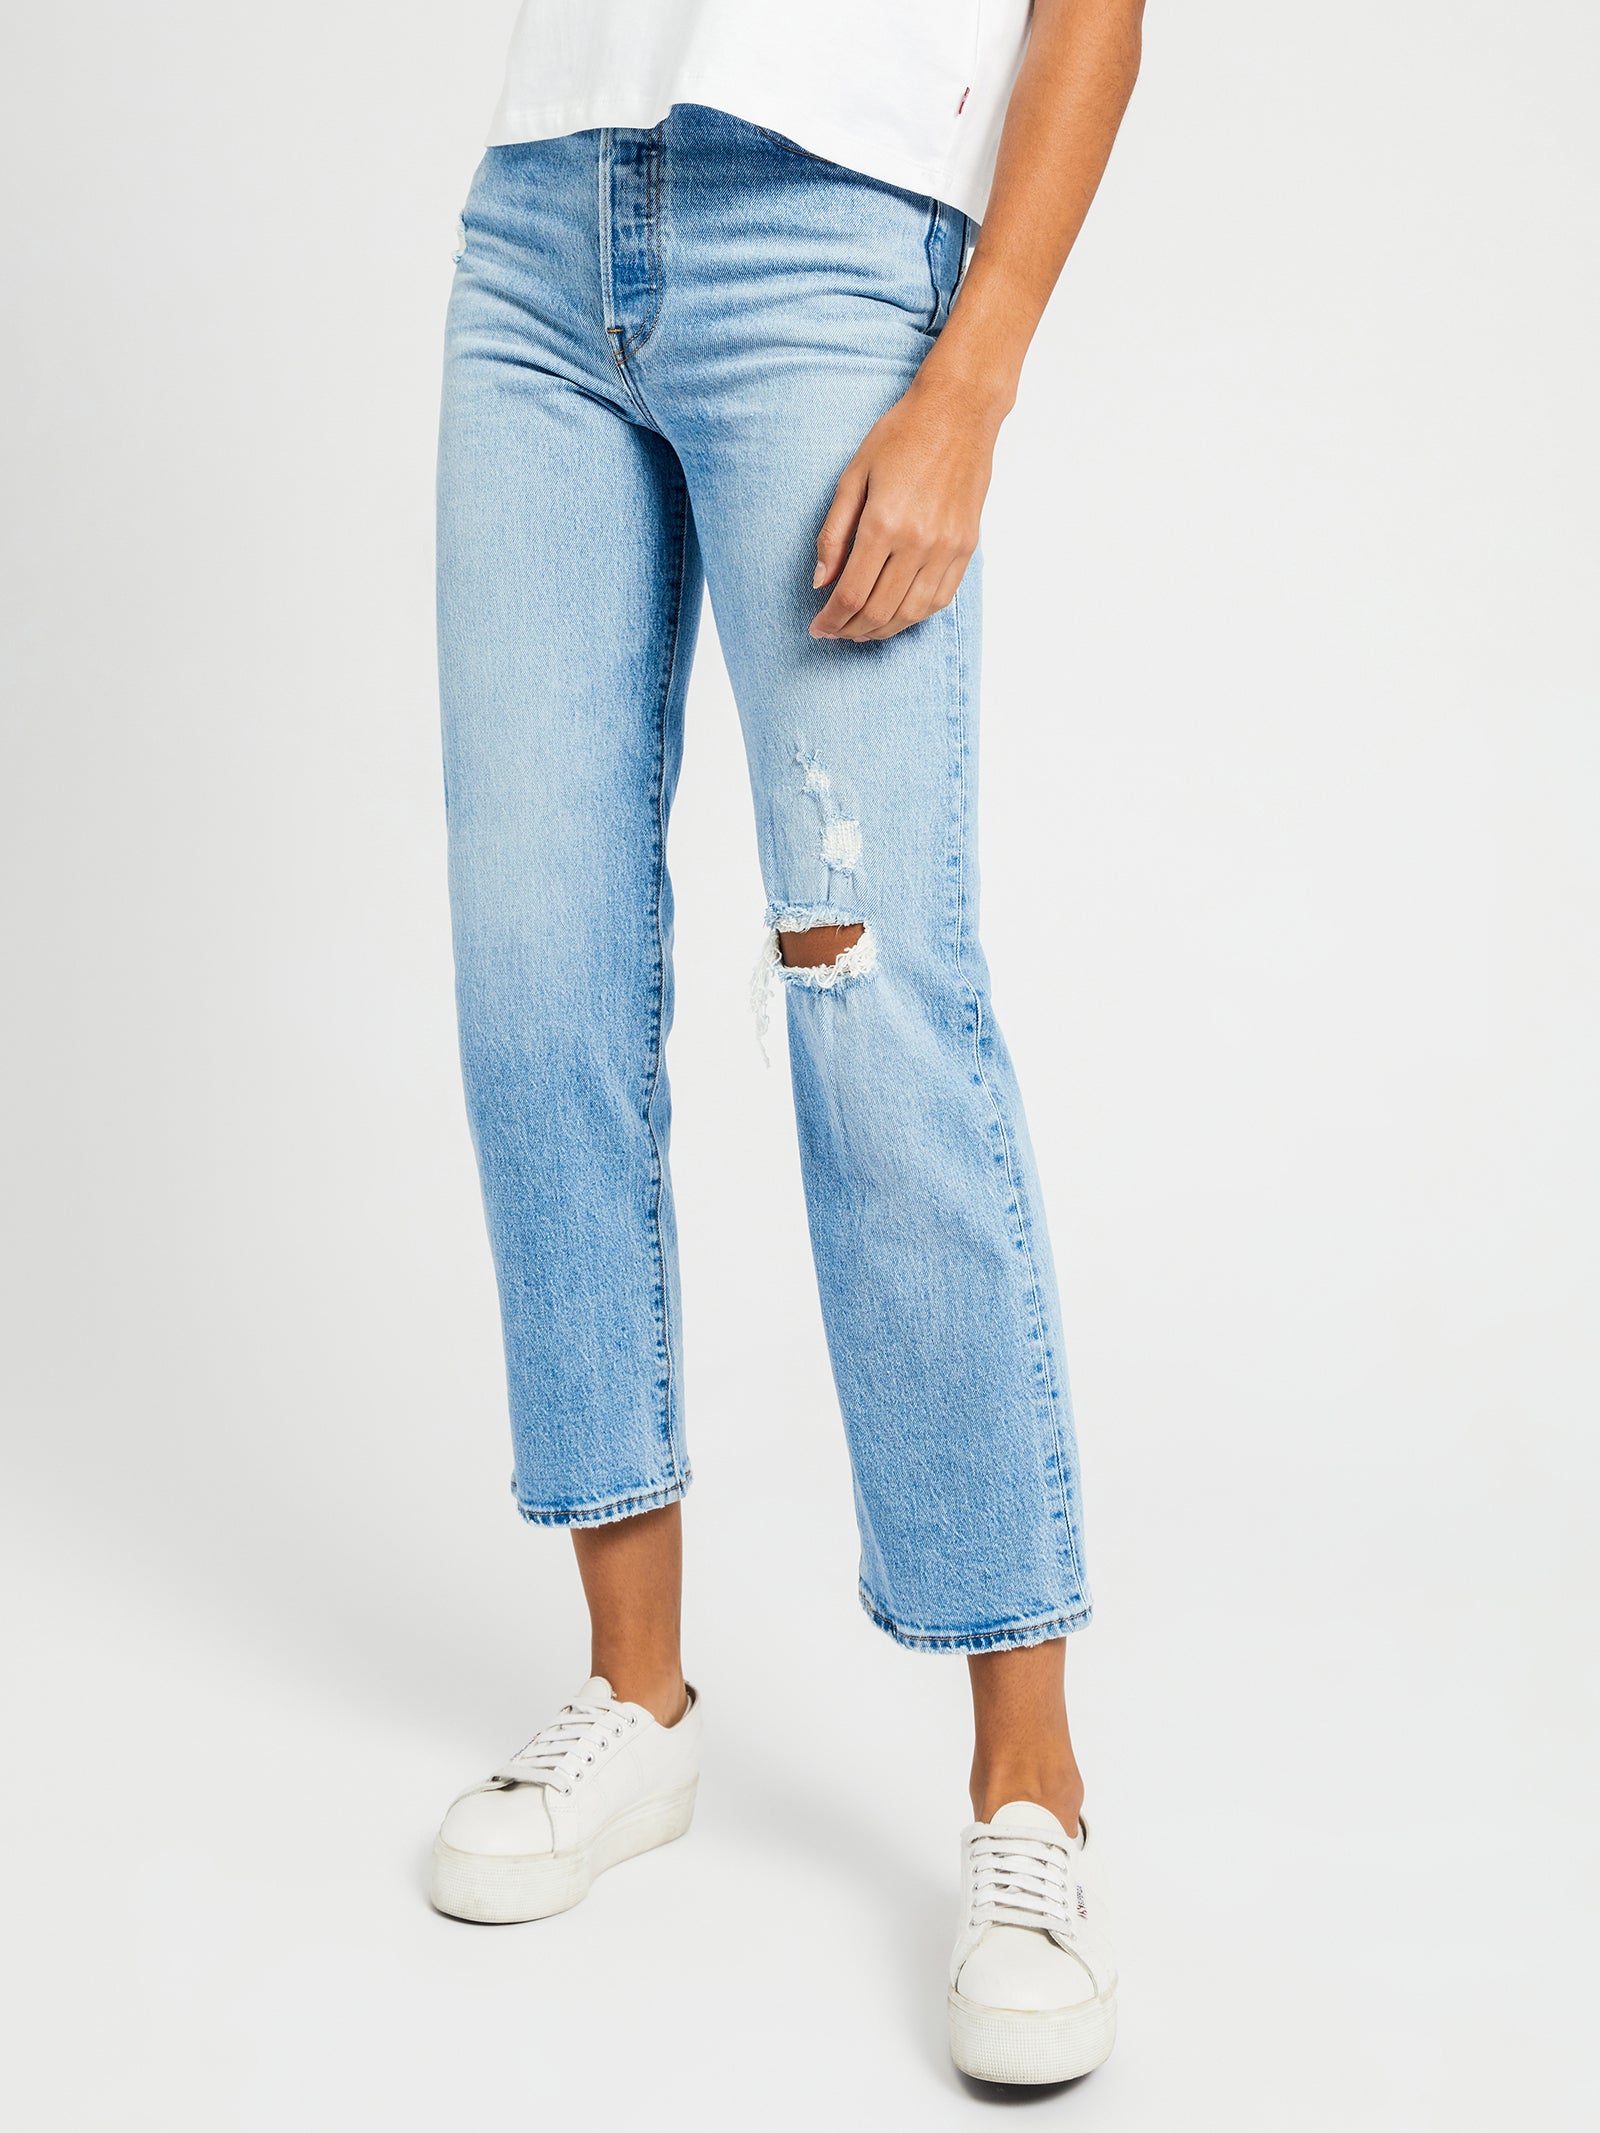 Ribcage Straight Ankle Jeans in Tango Fade Blue Denim - Glue Store